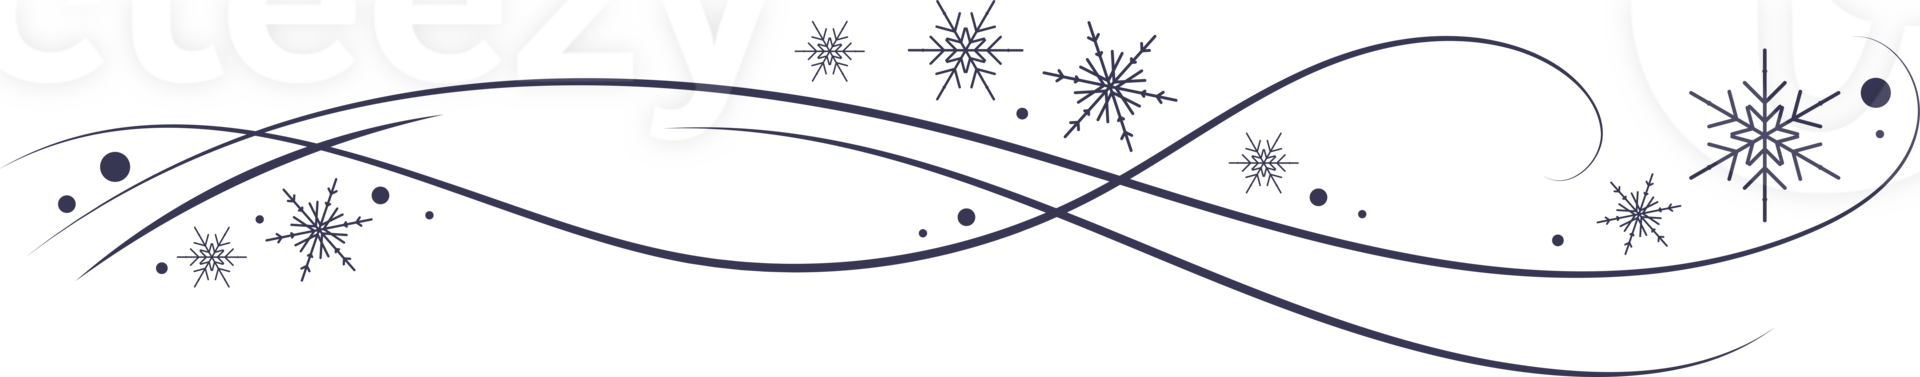 Snow wind doodle illustration. Flakes swirl blizzard. Wavy cold snowstorm. Wavy flow foe Christmas decoration png